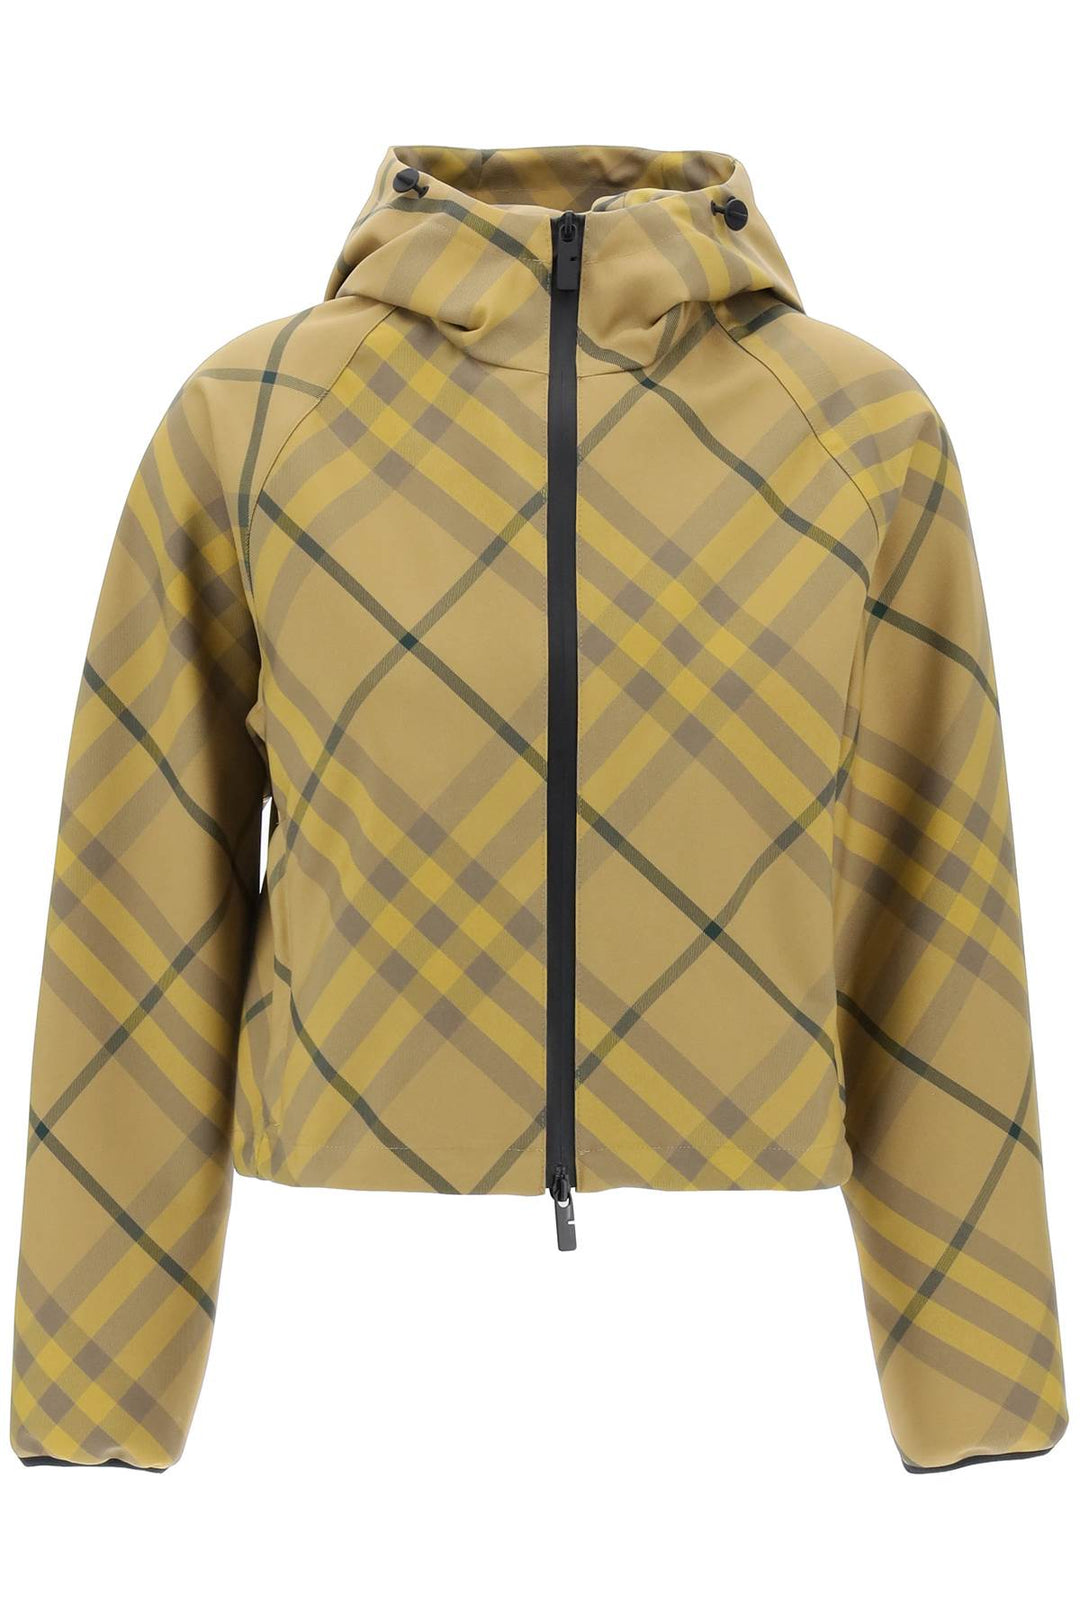 Burberry Replace With Double Quotecropped Check Jacketreplace With Double Quote   Khaki